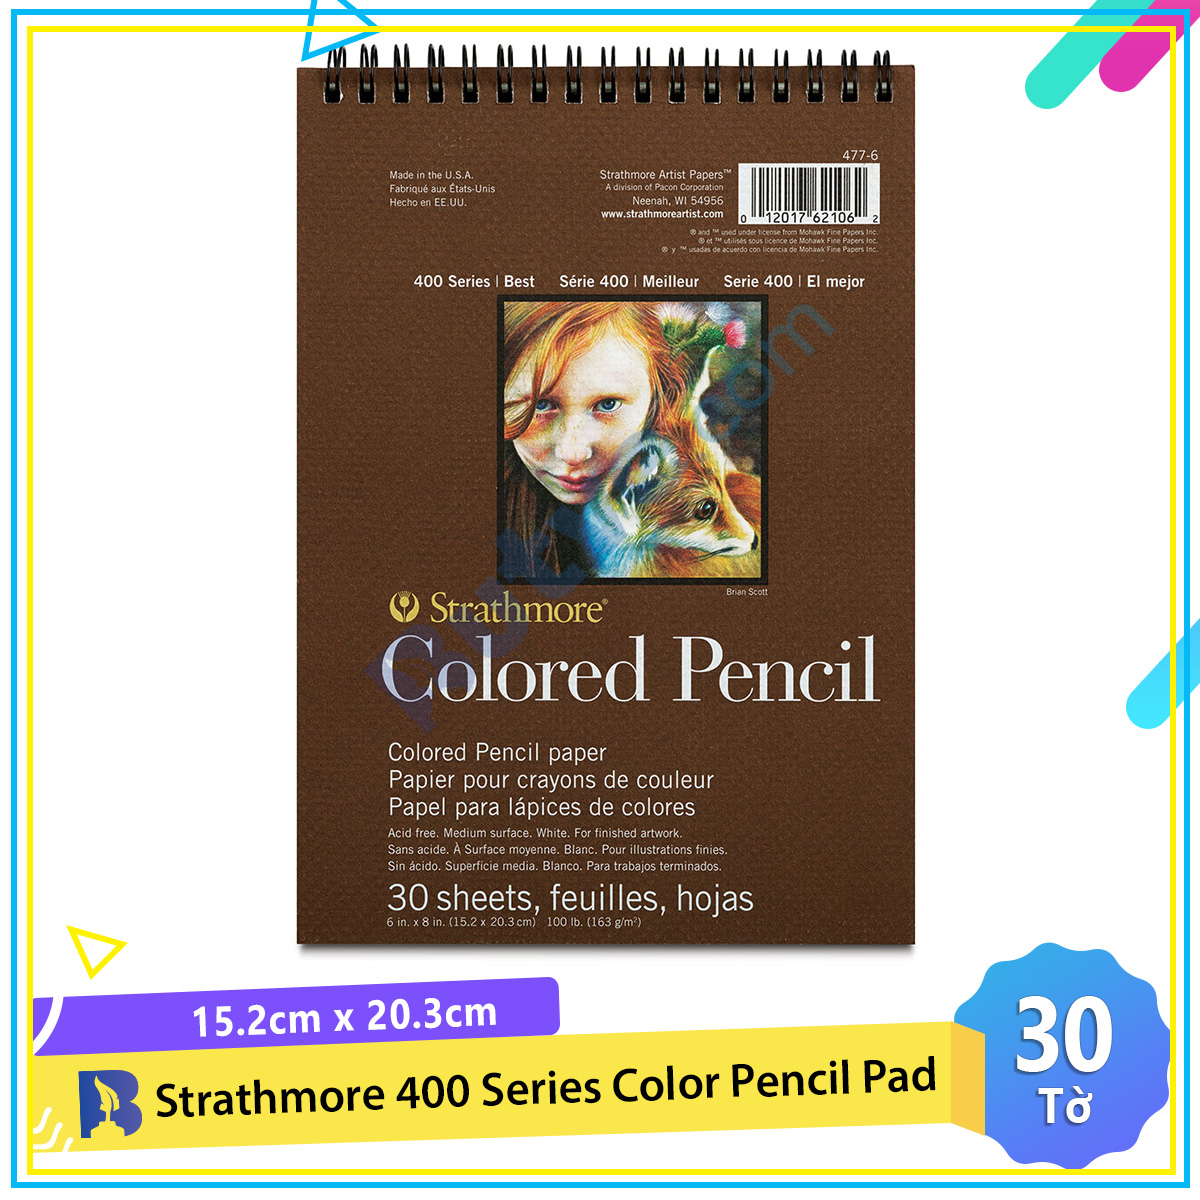 STRATHMORE 400 Series Colored Pencil Pad